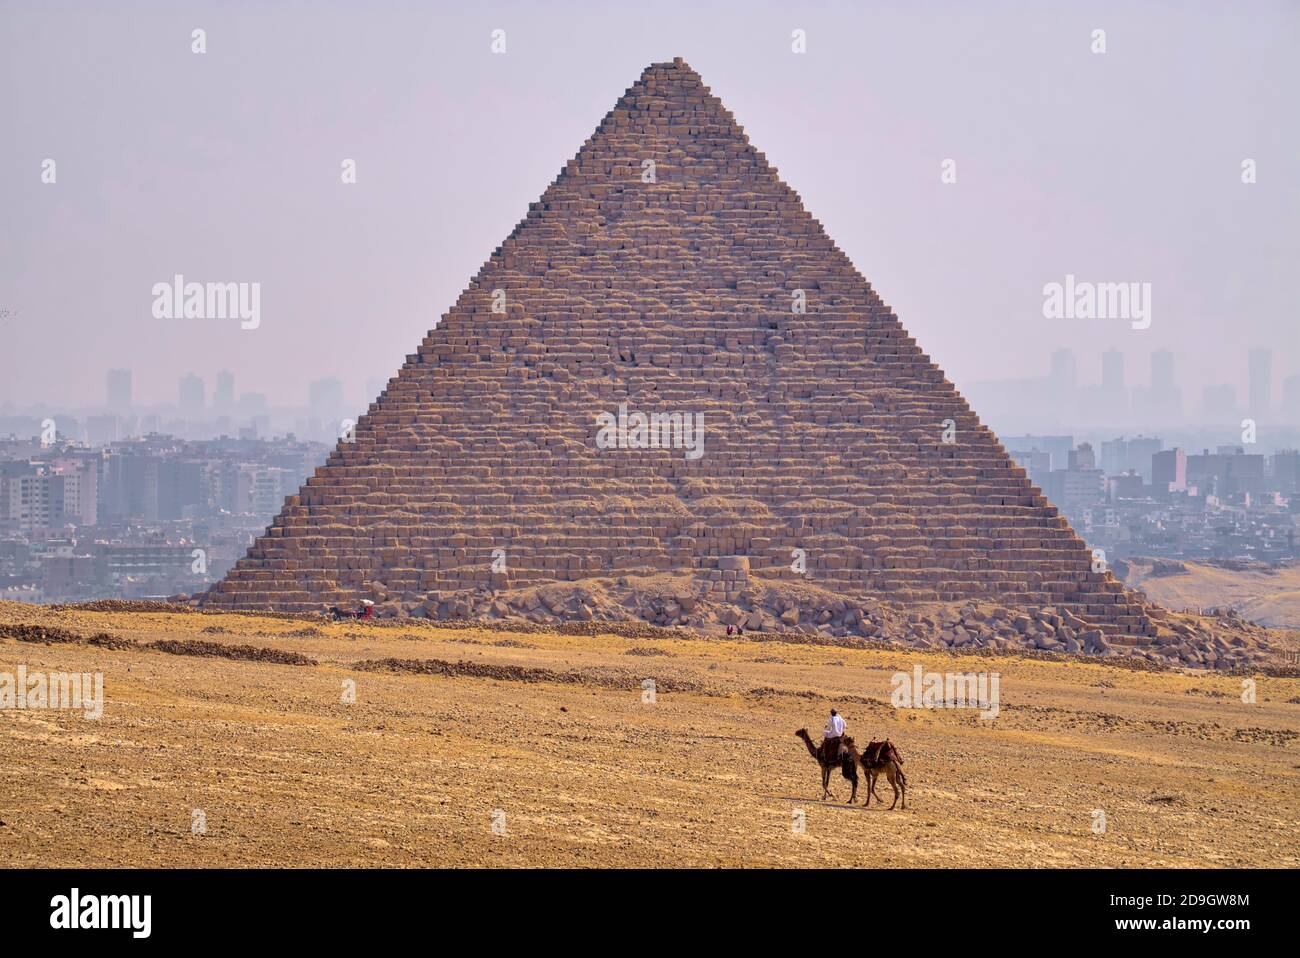 The Pyramid of Menkaure is the smallest of the three main Pyramids of Giza located on the Giza Plateau in the southwestern outskirts of Cairo, Egypt Stock Photo